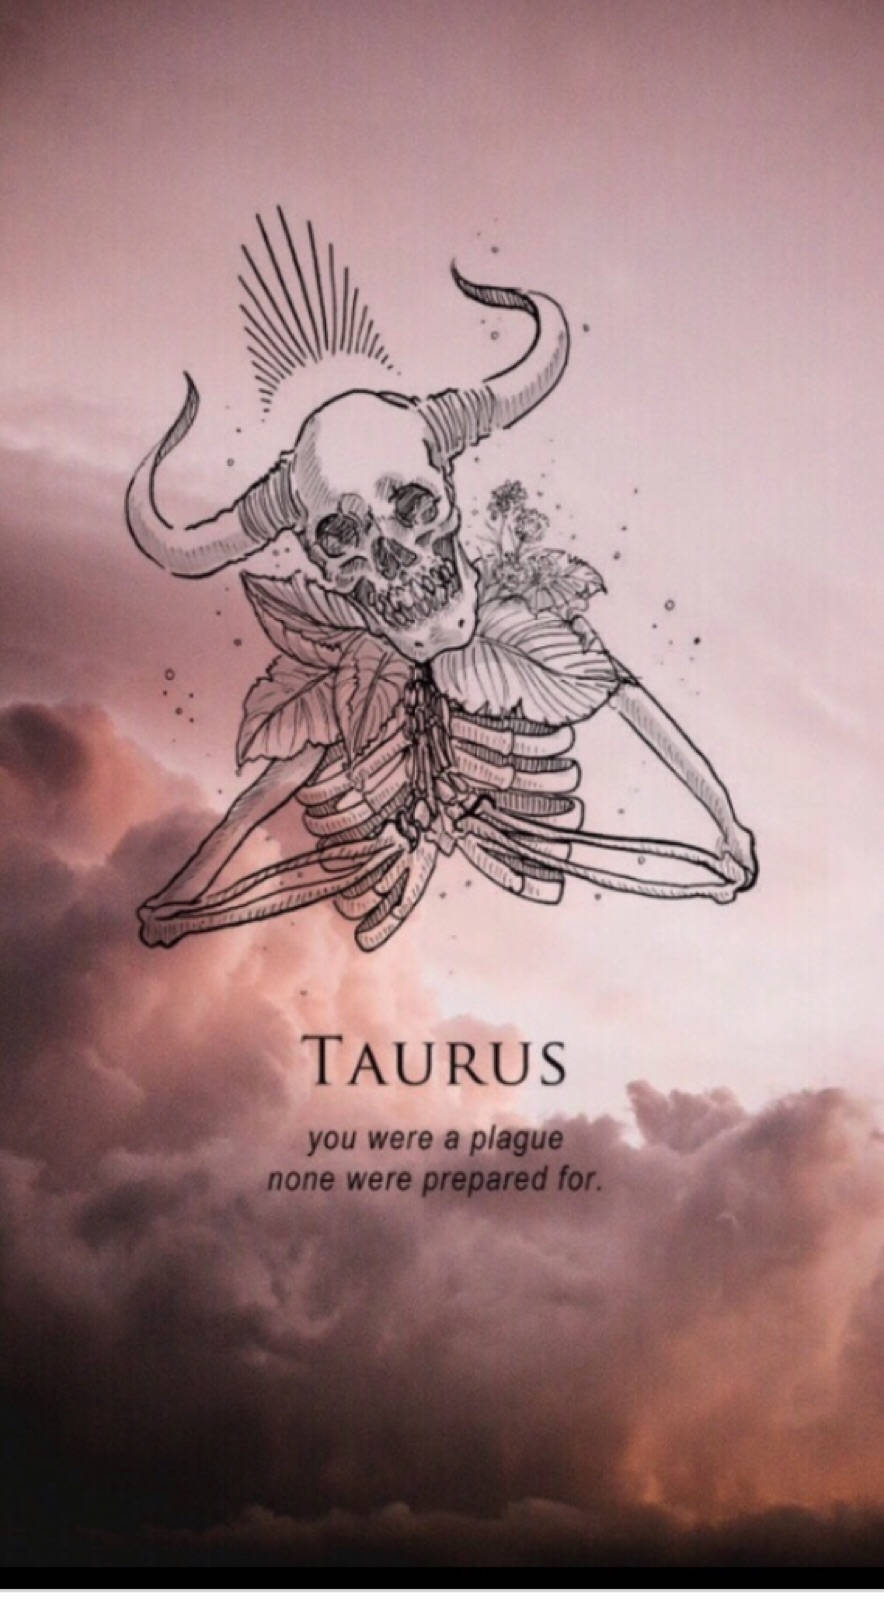 Taurusaesthetic Marrón (taurus Refers To The Taurus Zodiac Sign, Aesthetic Means 